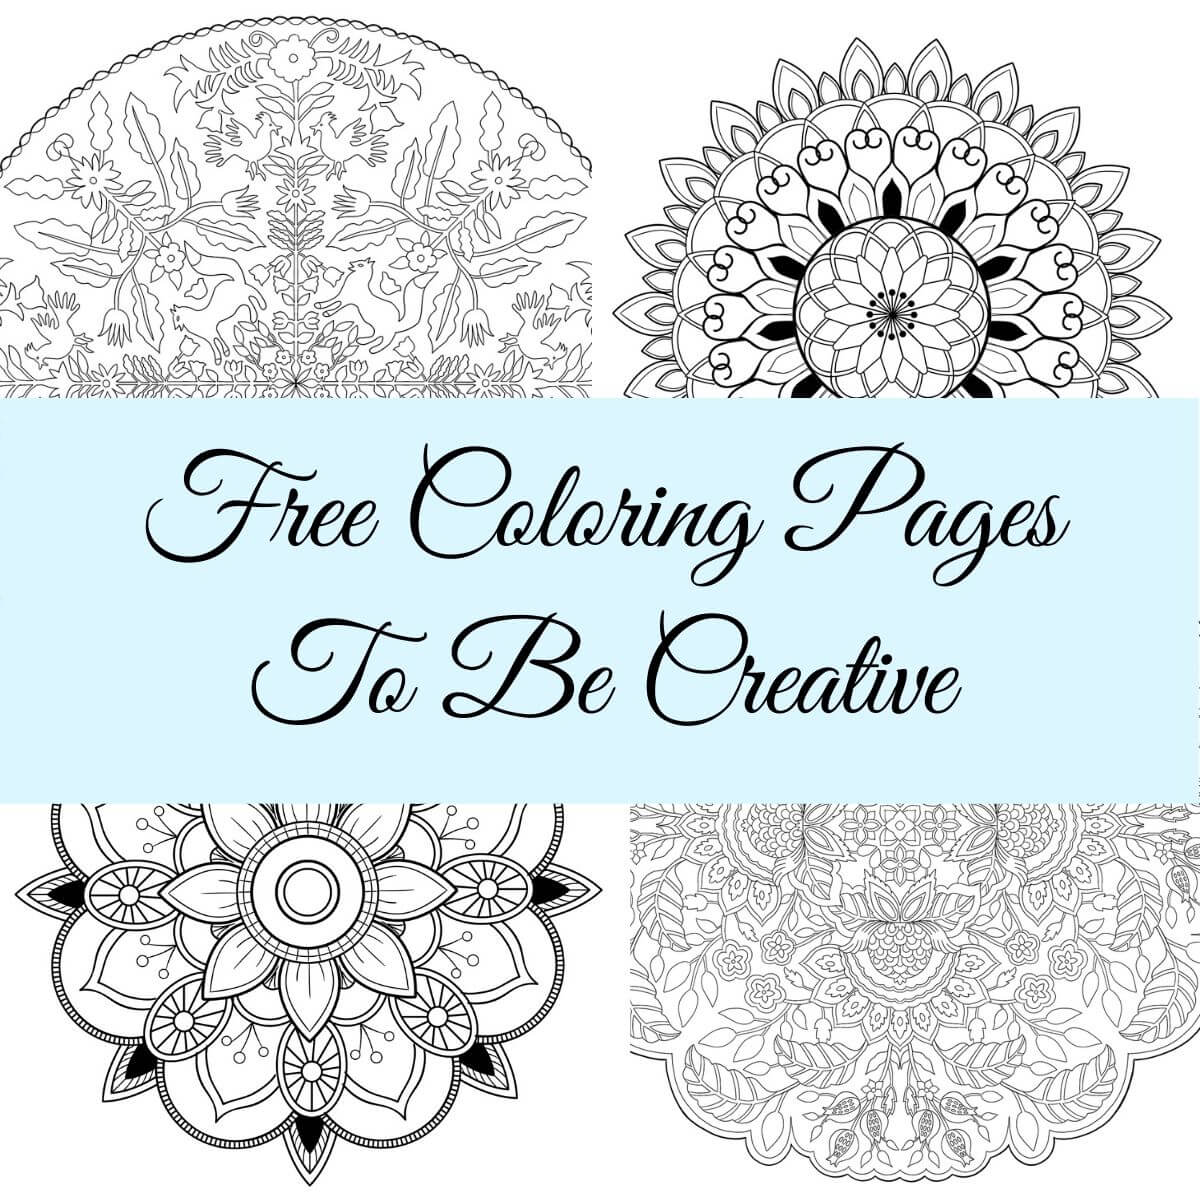 100 Best Adult Coloring Books